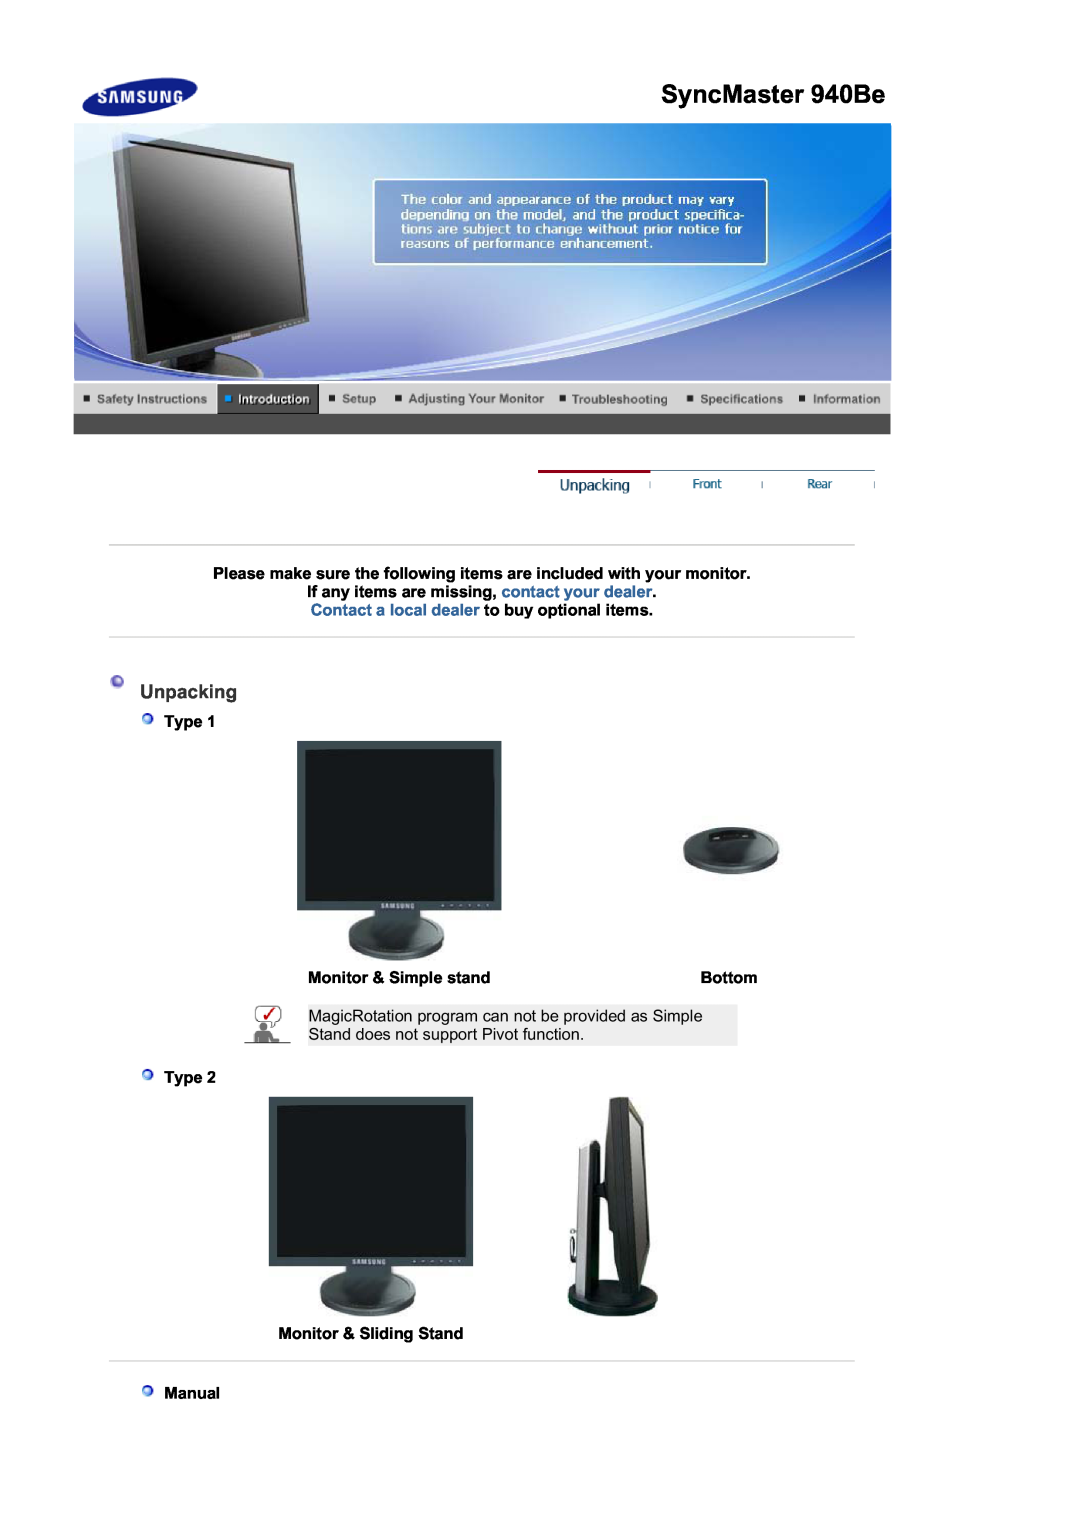 Samsung SyncMaster 940Be, Type Monitor & Sliding Stand Manual, Unpacking, If any items are missing, contact your dealer 